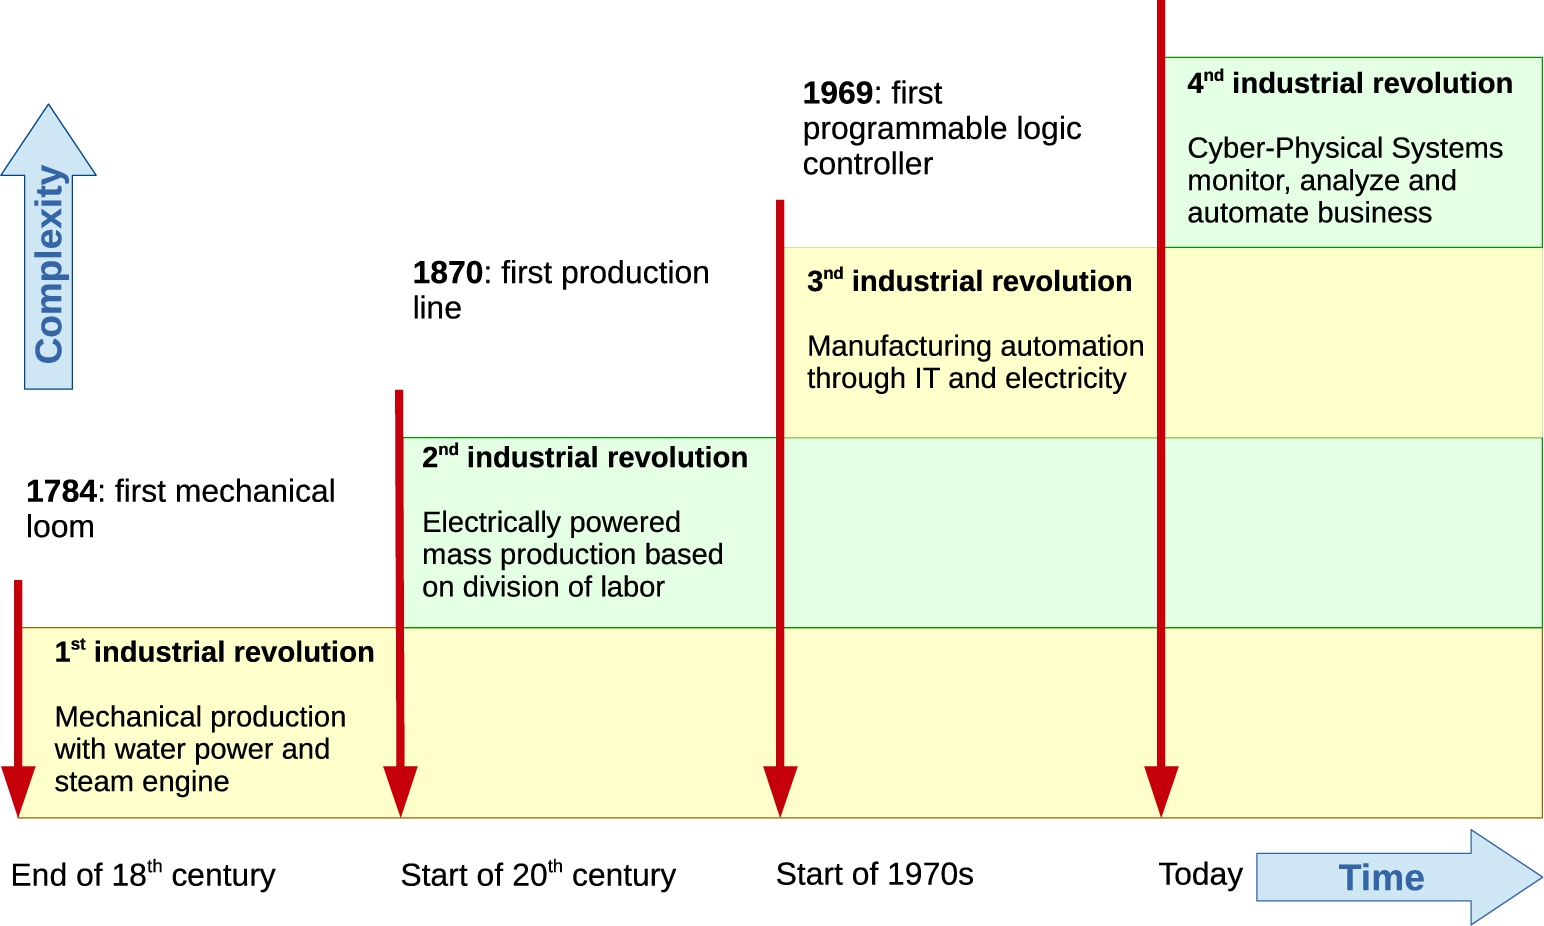 The 4 industrial revolutions leading to the smart factory of the future and cyber-physical production systems.